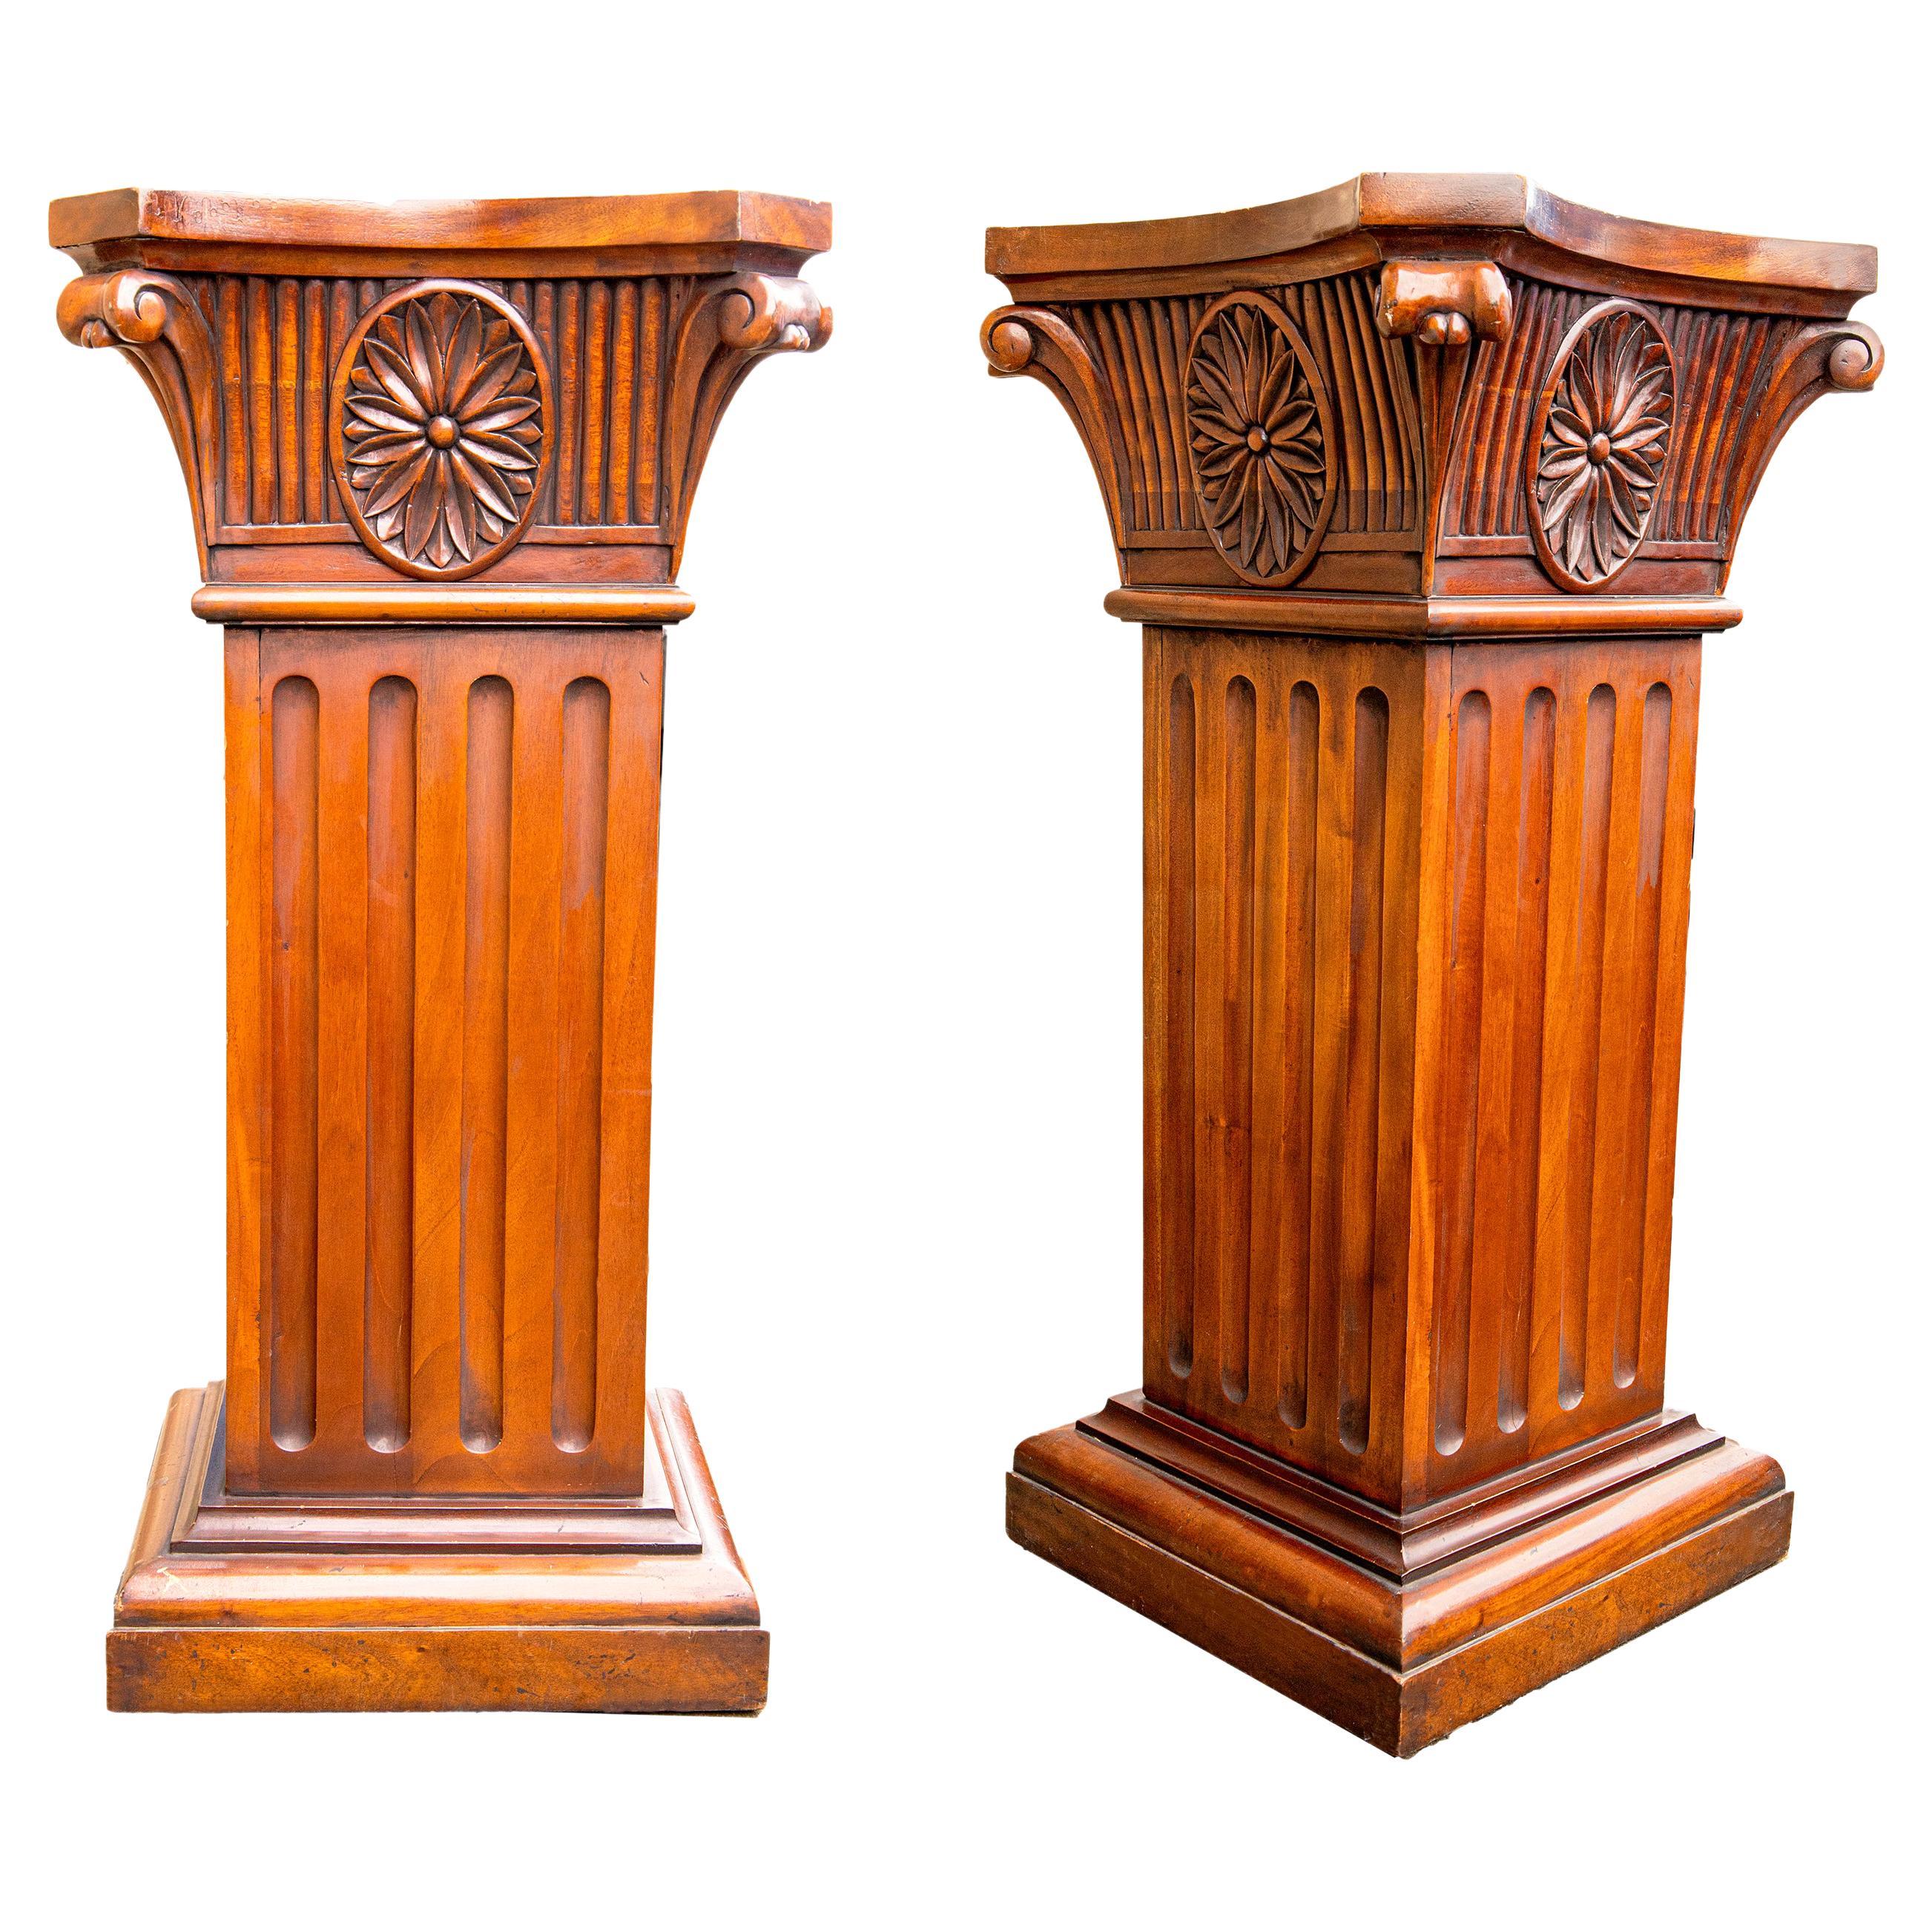 Pair of Carved Wood Pedestals with Secret Compartment